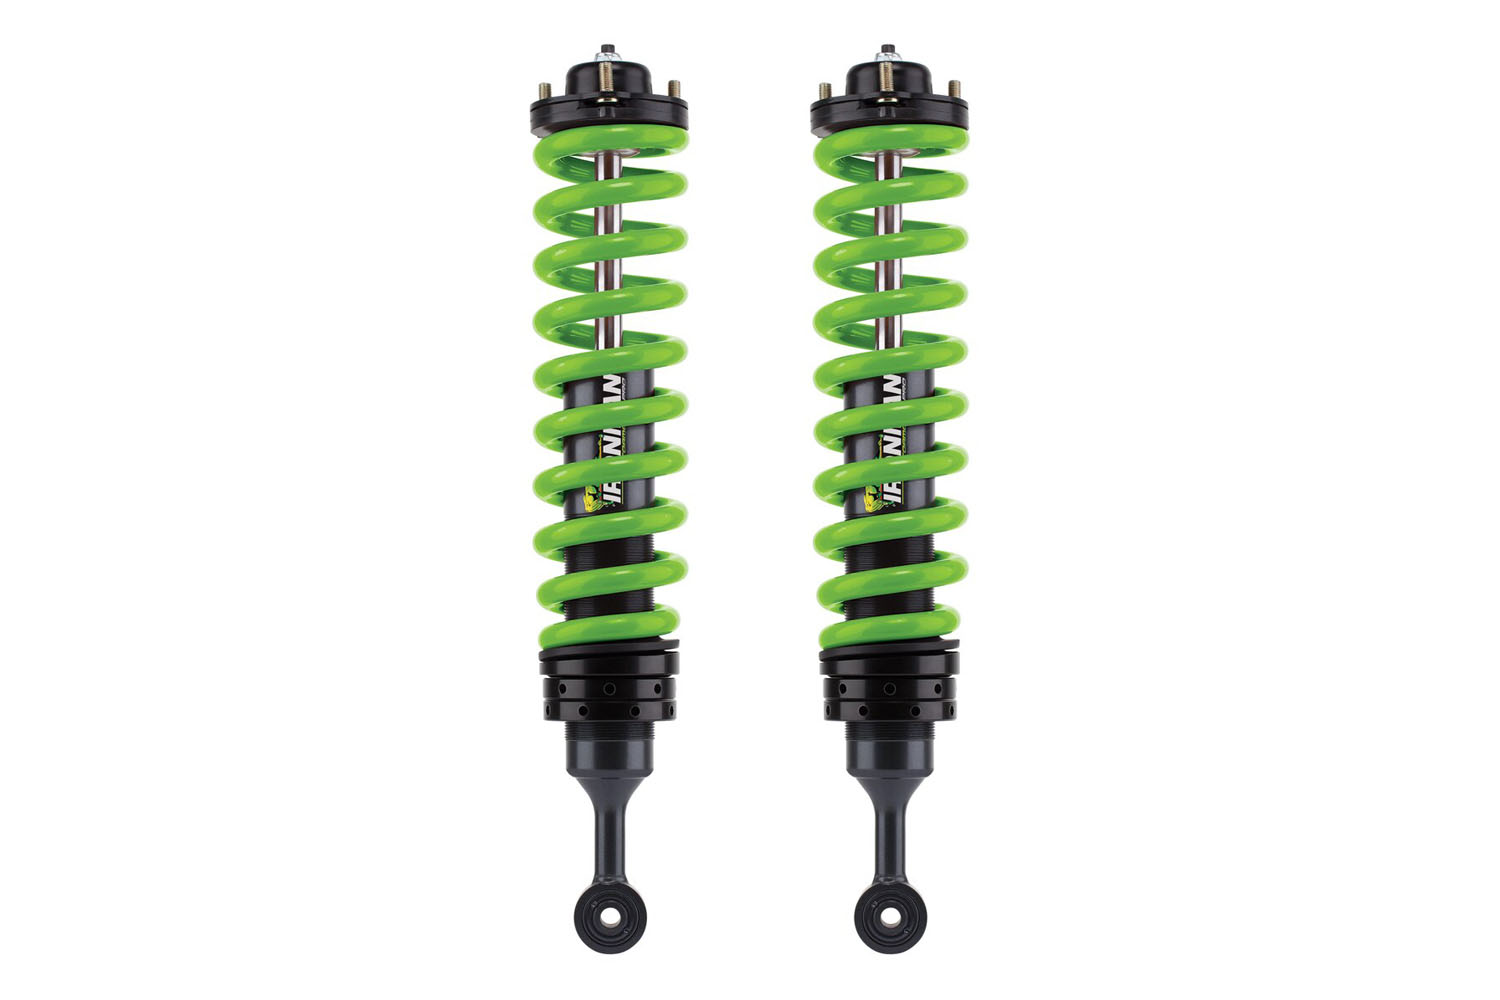 Can I achieve more than 3in of lift with these coil overs? I’m looking for at least 4in.